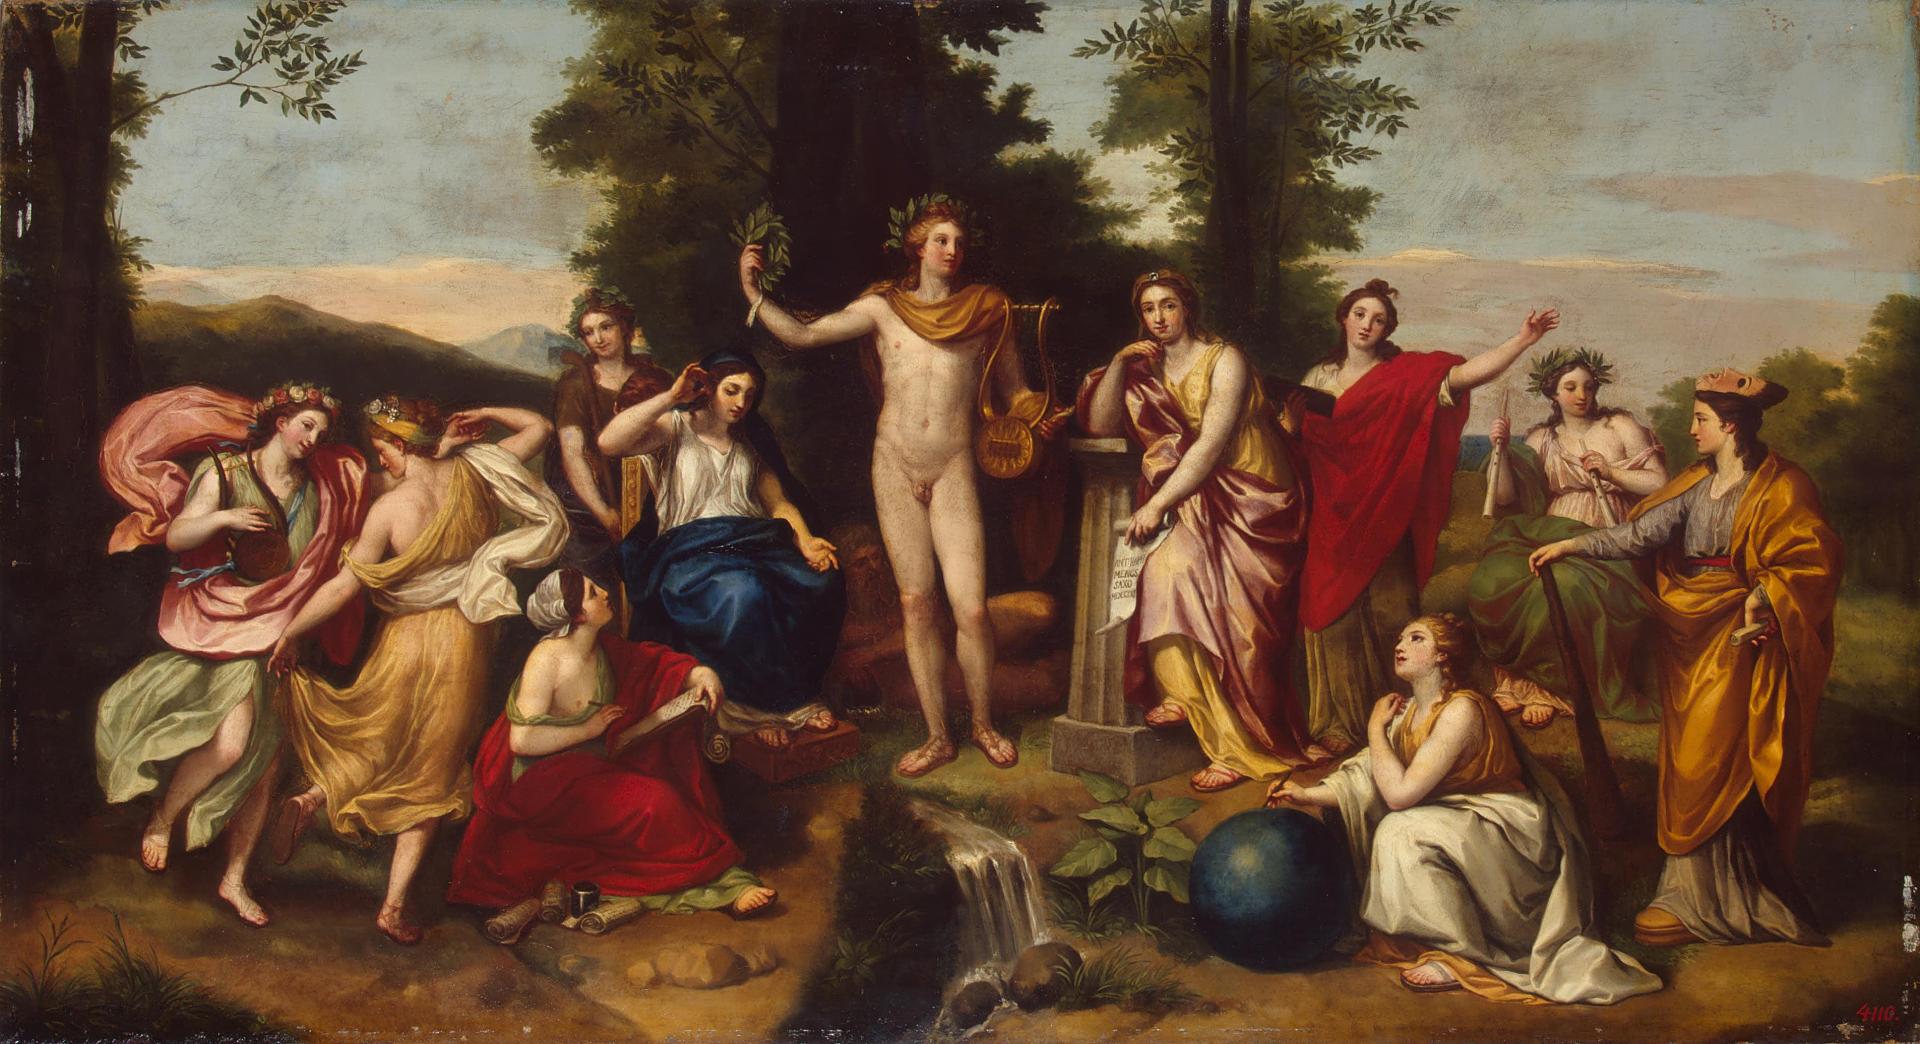 Fig. 3 – Mengs, Anton Raphael. Parnassus. Germany. 1761. Oil on canvas 55 x 101 cm. Inv. no. GE-1327. Crédito: The State Hermitage Museum, St. Petersburg.